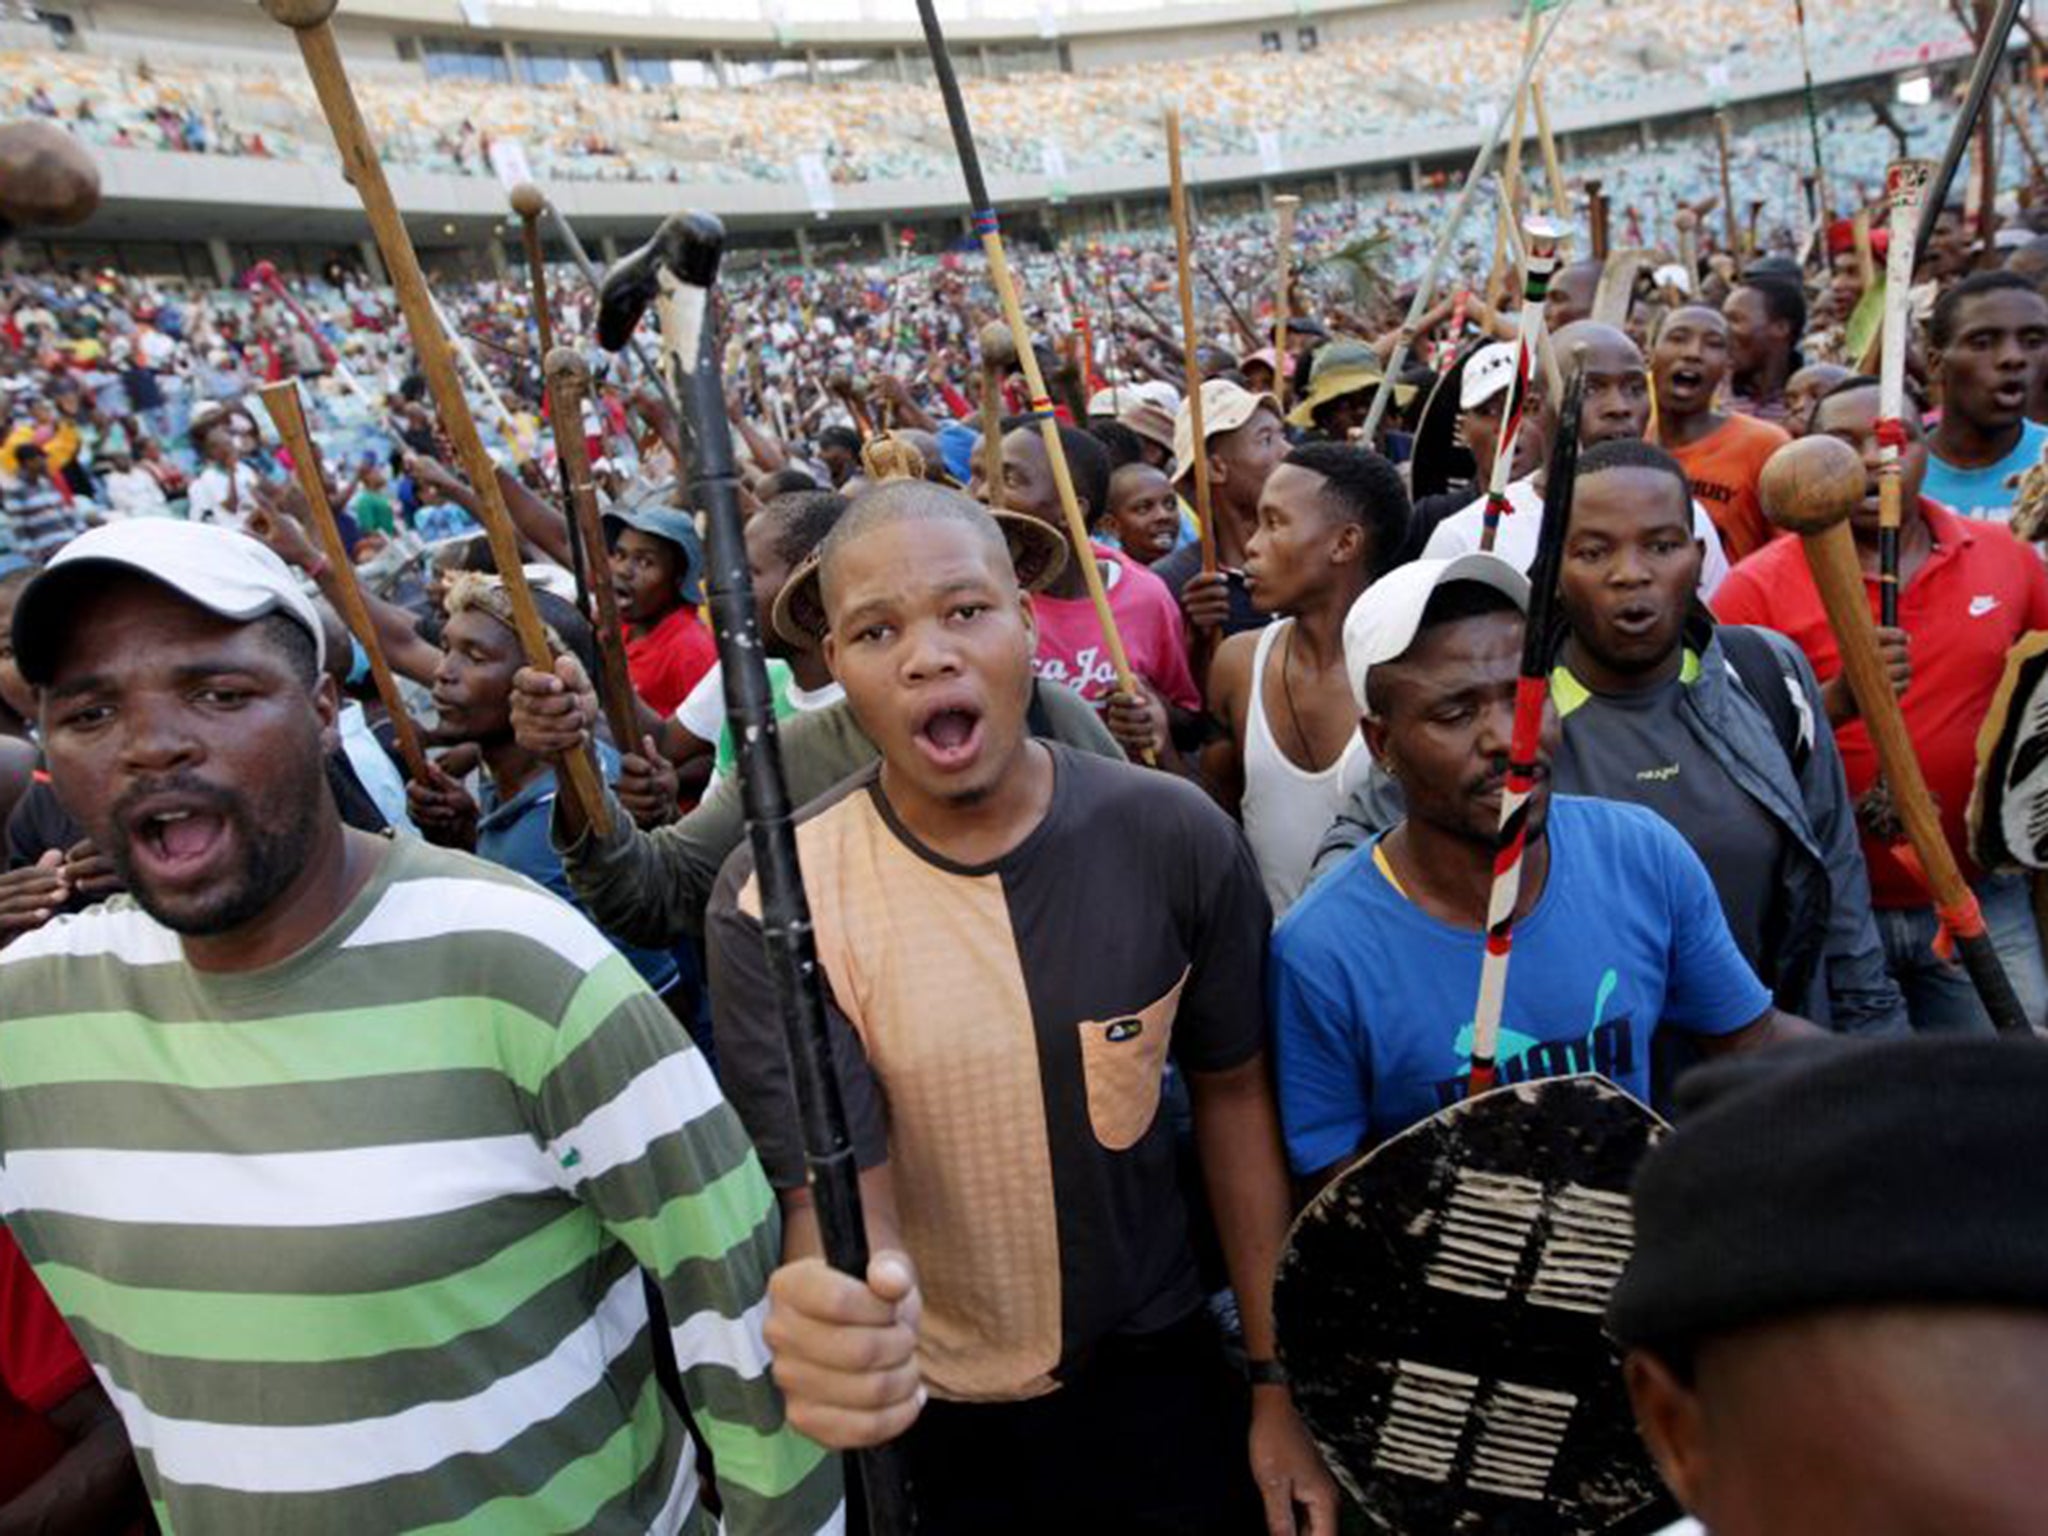 People gather to listen to the Zulu King's speech at the Moses Mabhida Football Stadium in Durban. King Zwelithini has denied whipping up xenophobic hatred in South Africa